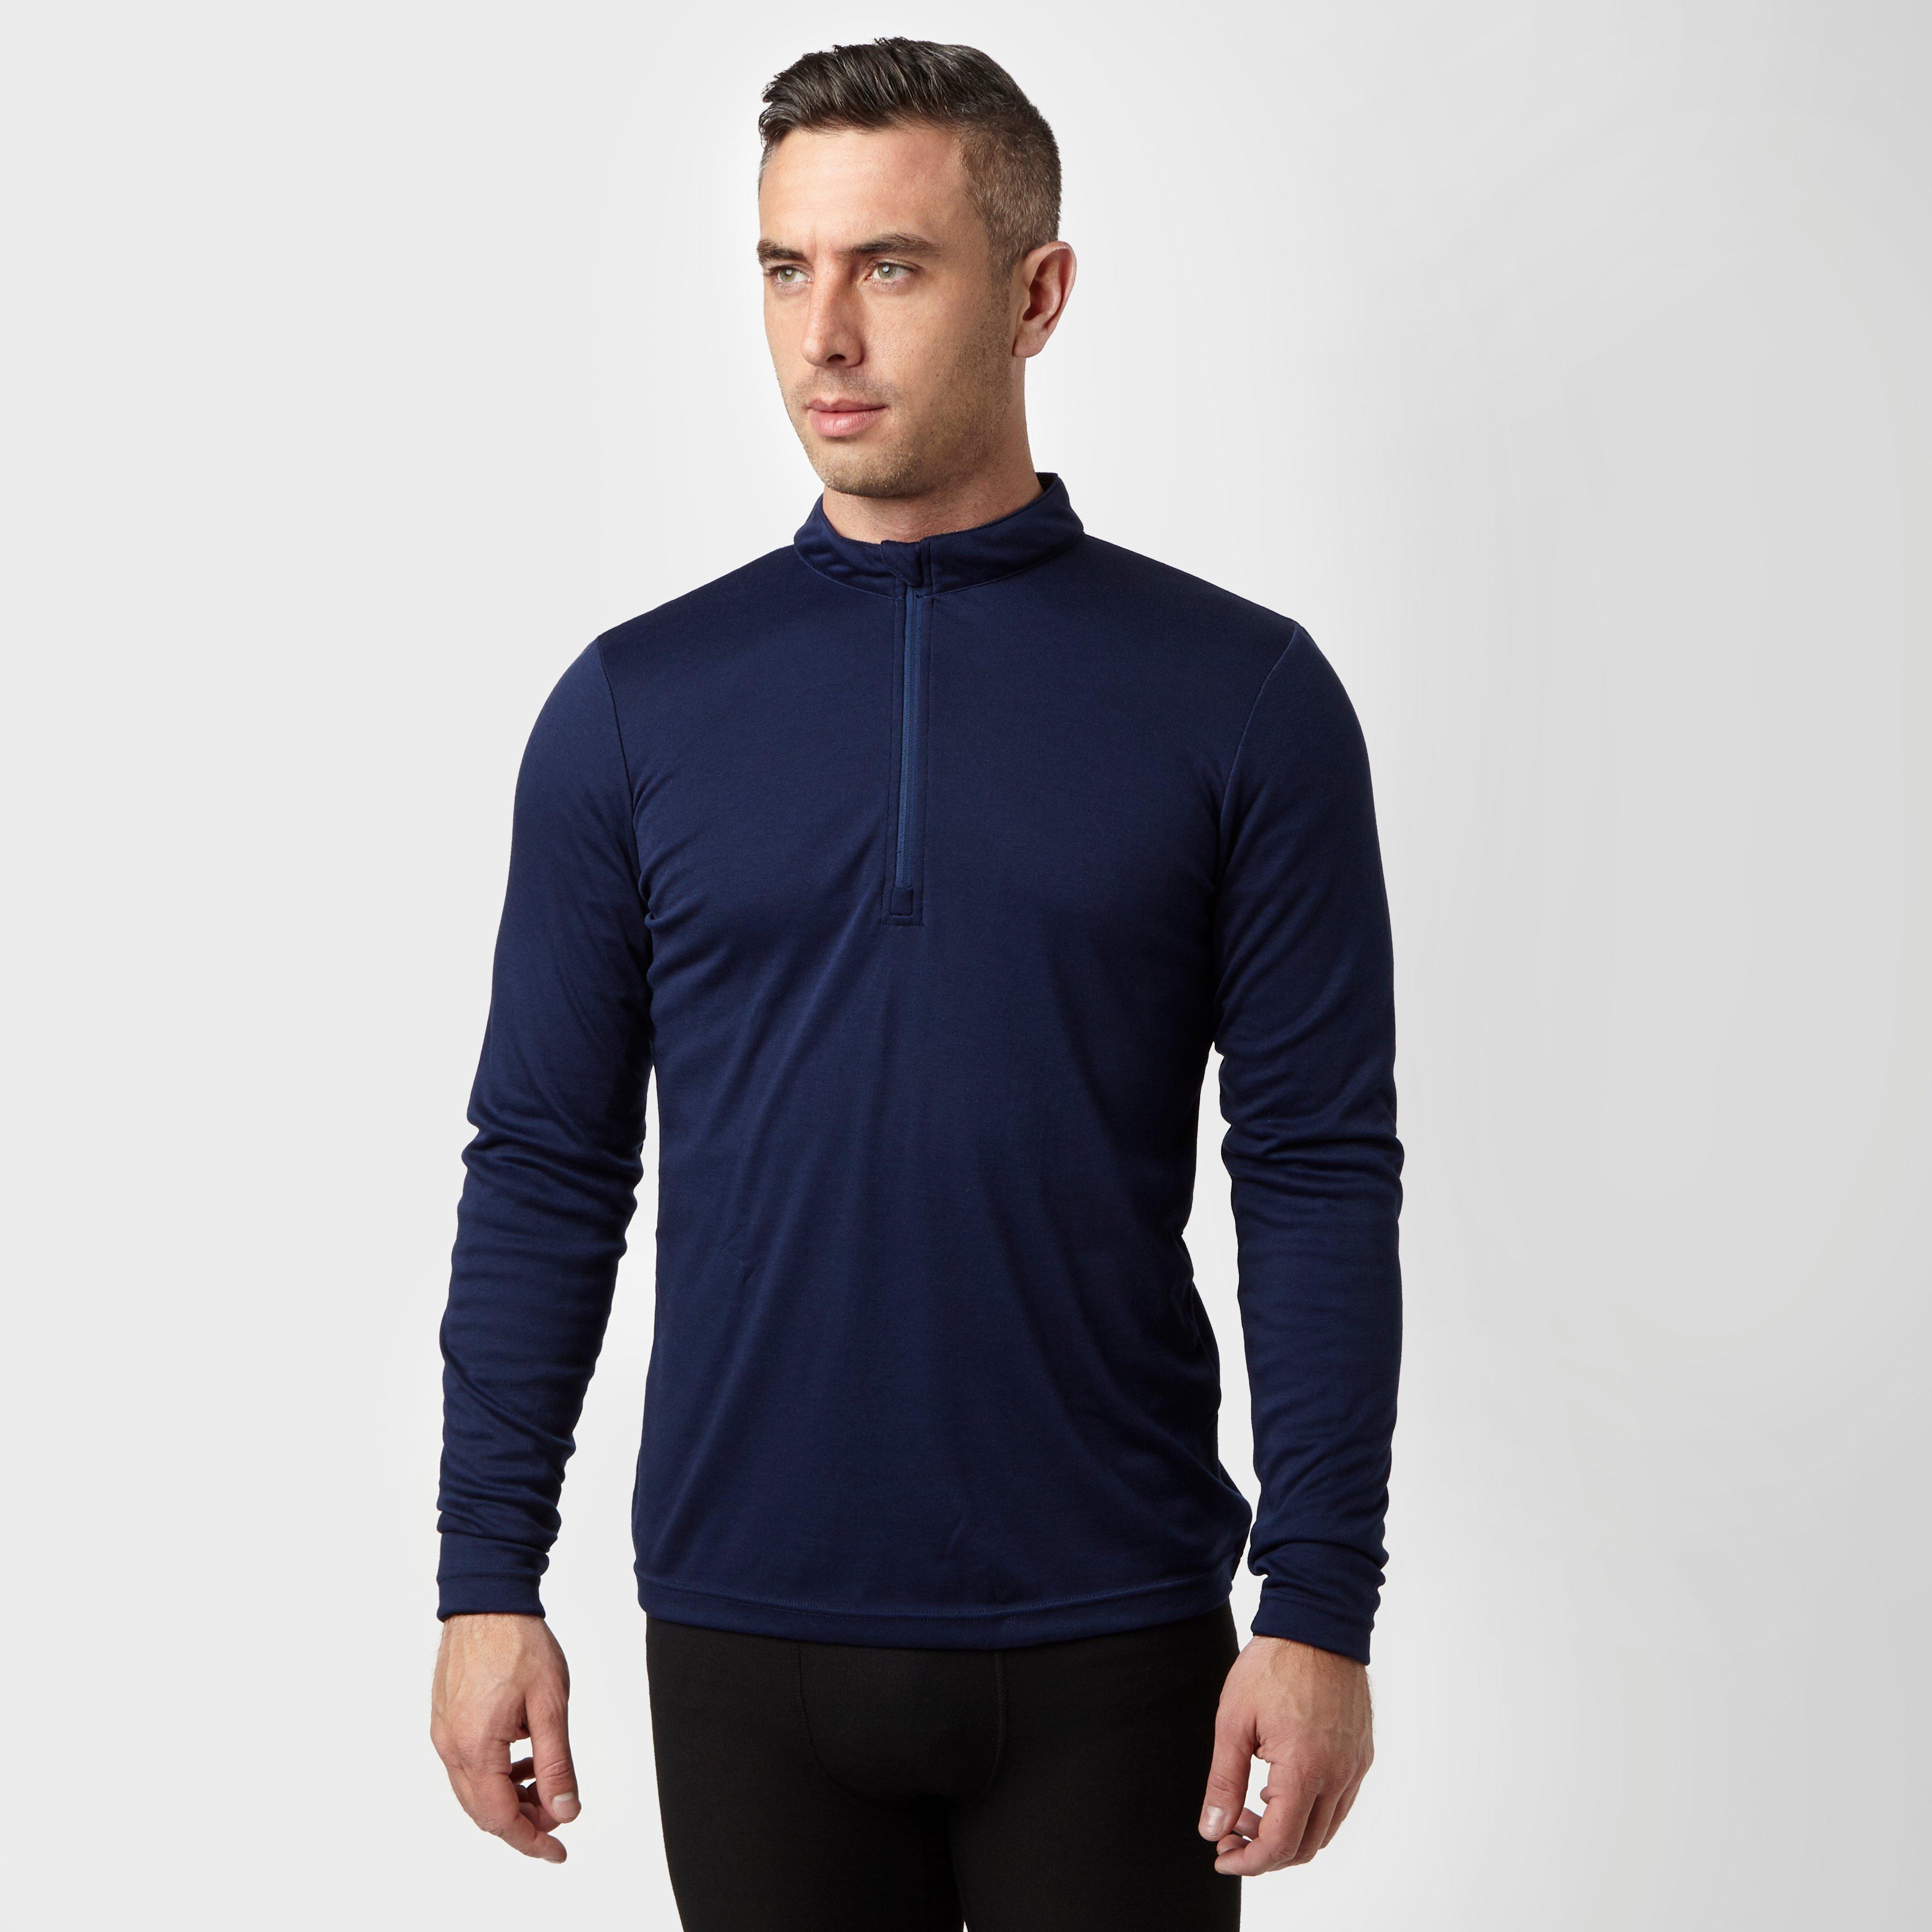 Image of Peter Storm Men's Long Sleeve Thermal Zip Baselayer - Navy/Nvy, Navy/NVY